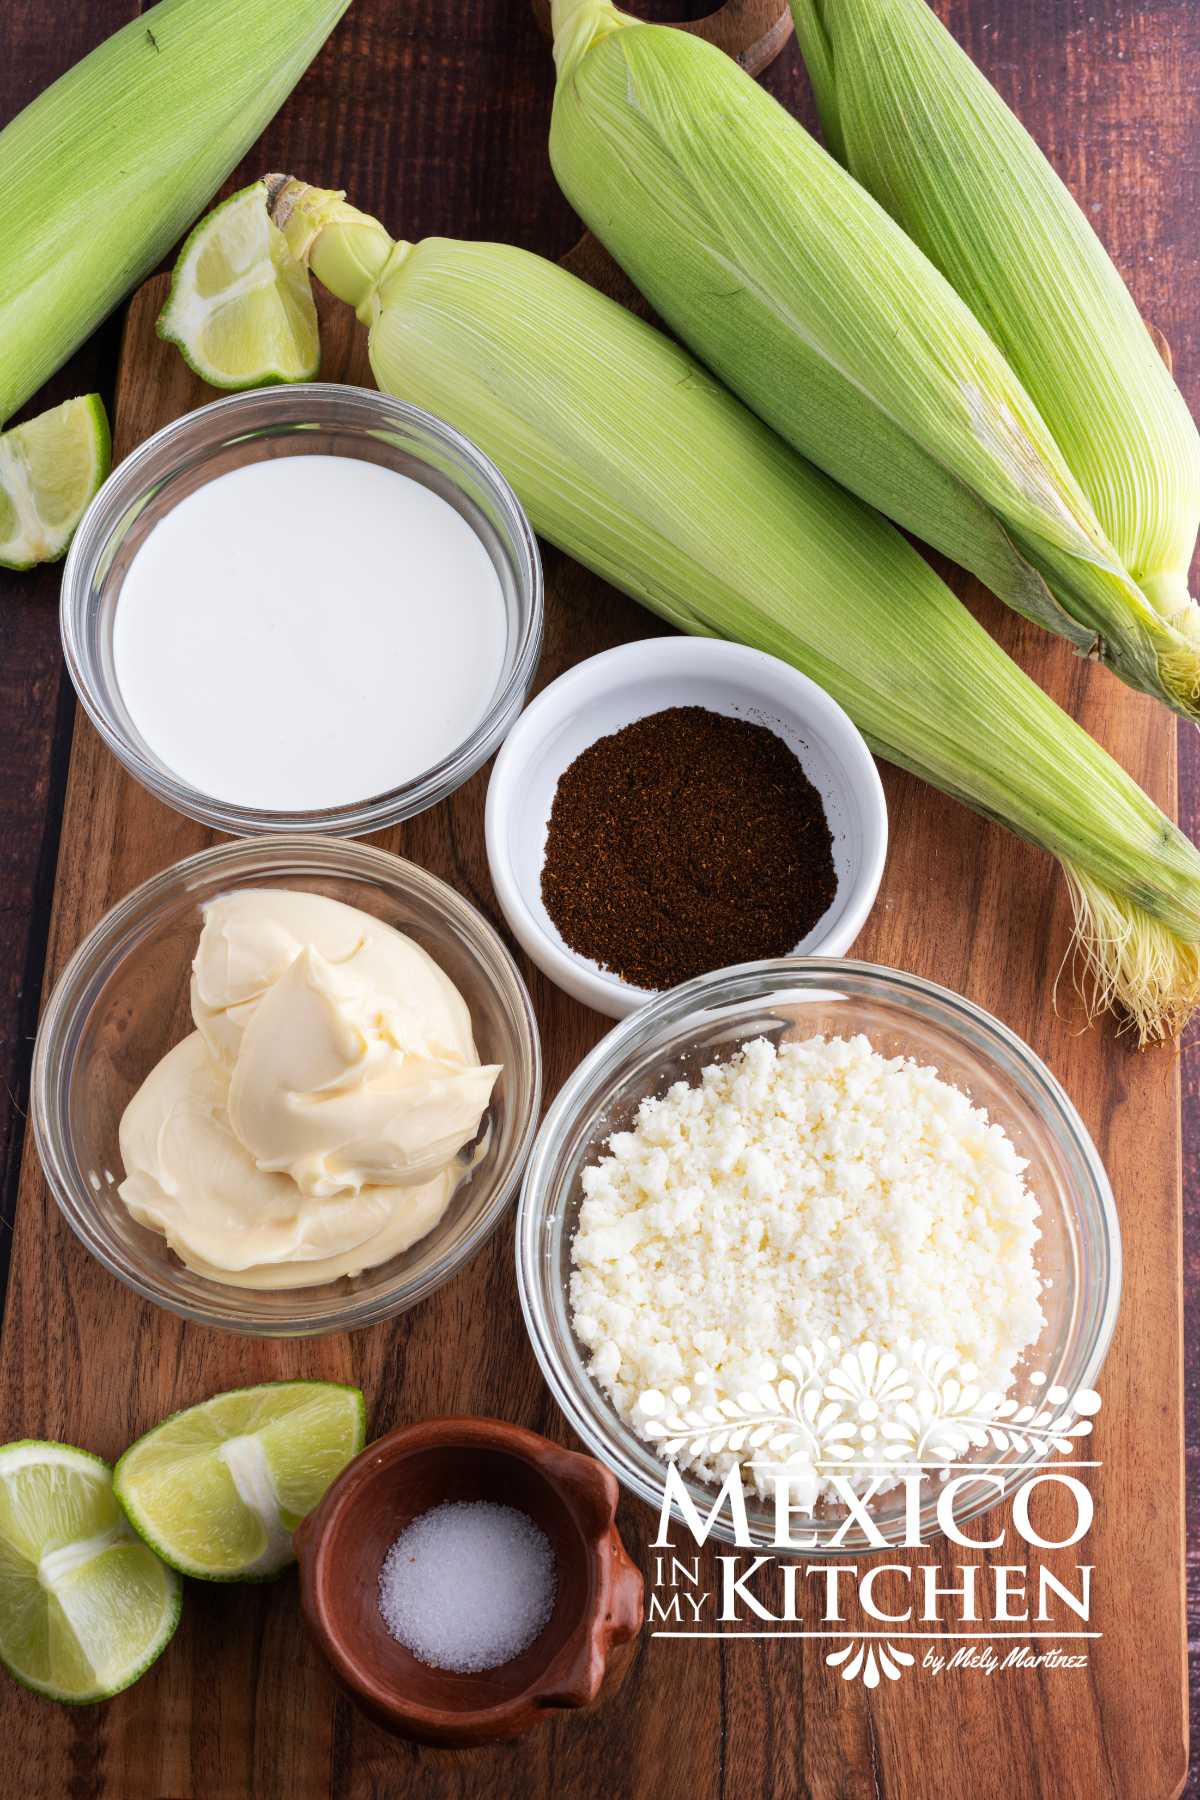 Ingredients like corn with husks, Mexican crema, mayo, limes, cotija cheese, and chili powder displays on a cutting board.